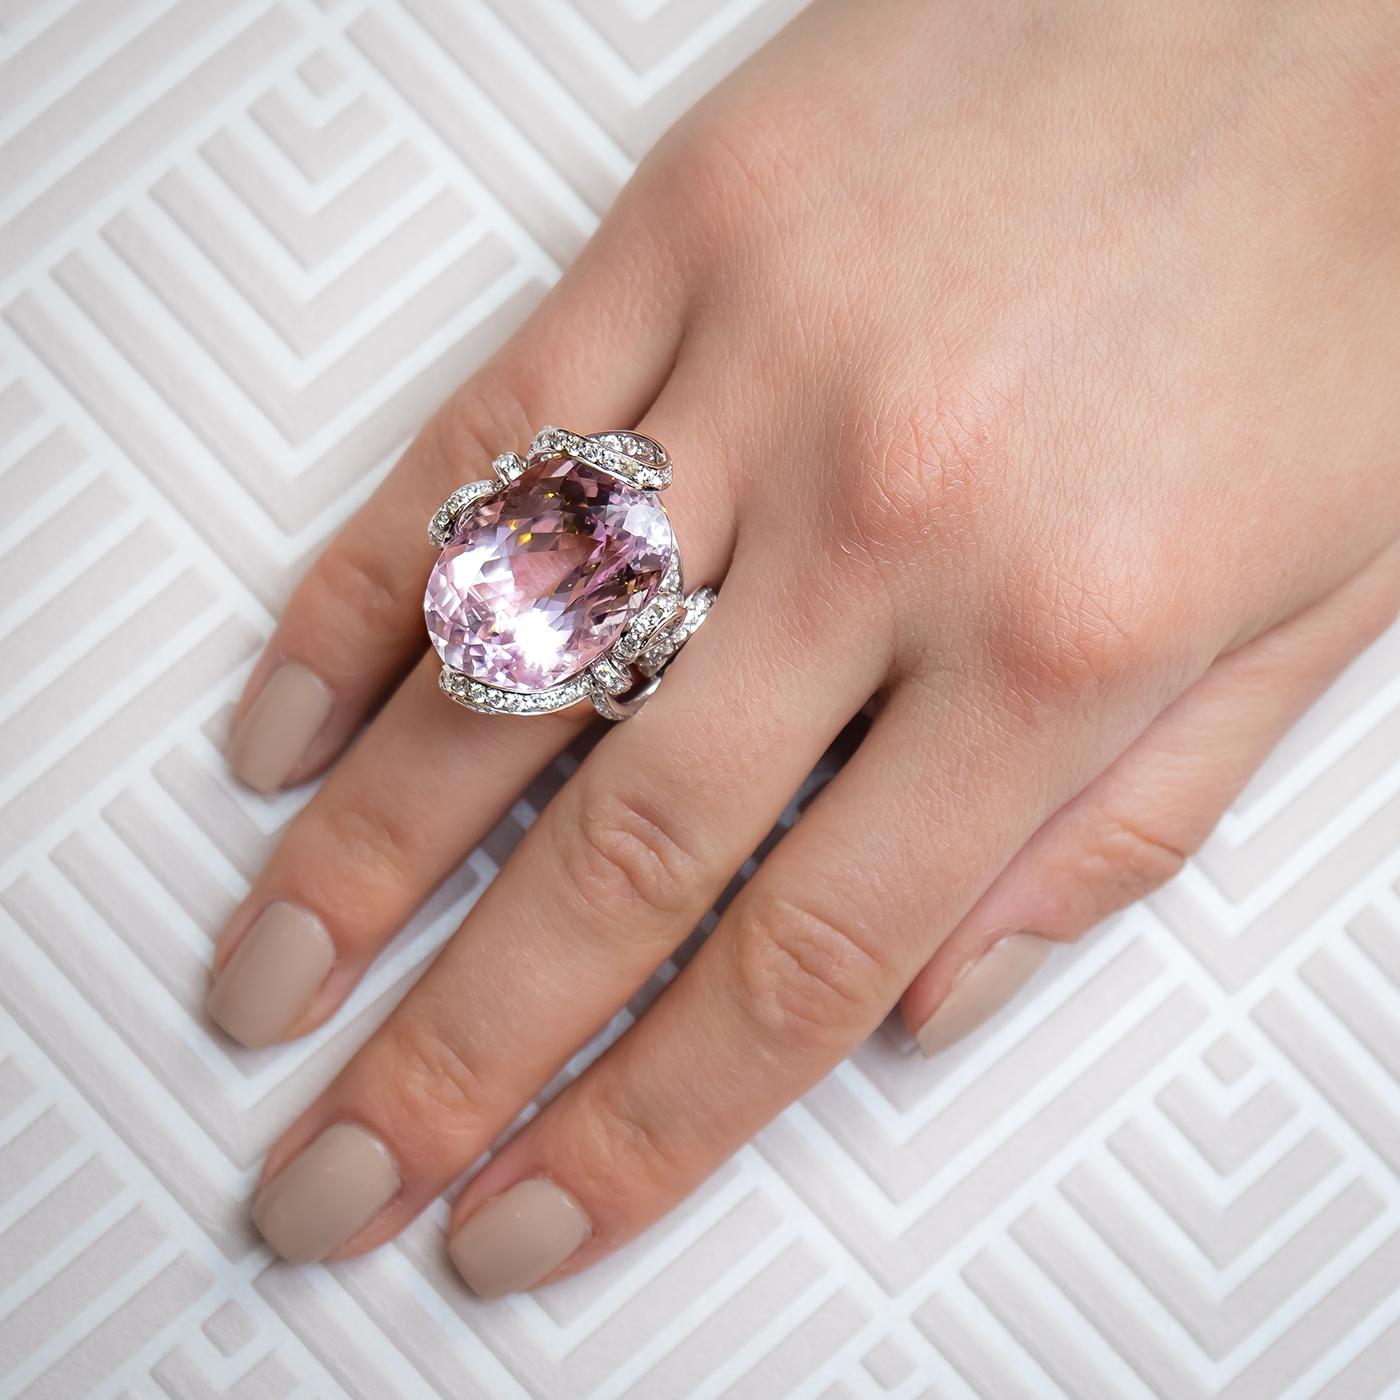 A kunzite ring, set with a 46.97ct oval kunzite, with 2.86ct of small round brilliant-cut diamonds set in twisting loops and bows holding then centre stone. Mounted in platinum.
The finger size is approximately UK size M / USA size 6.